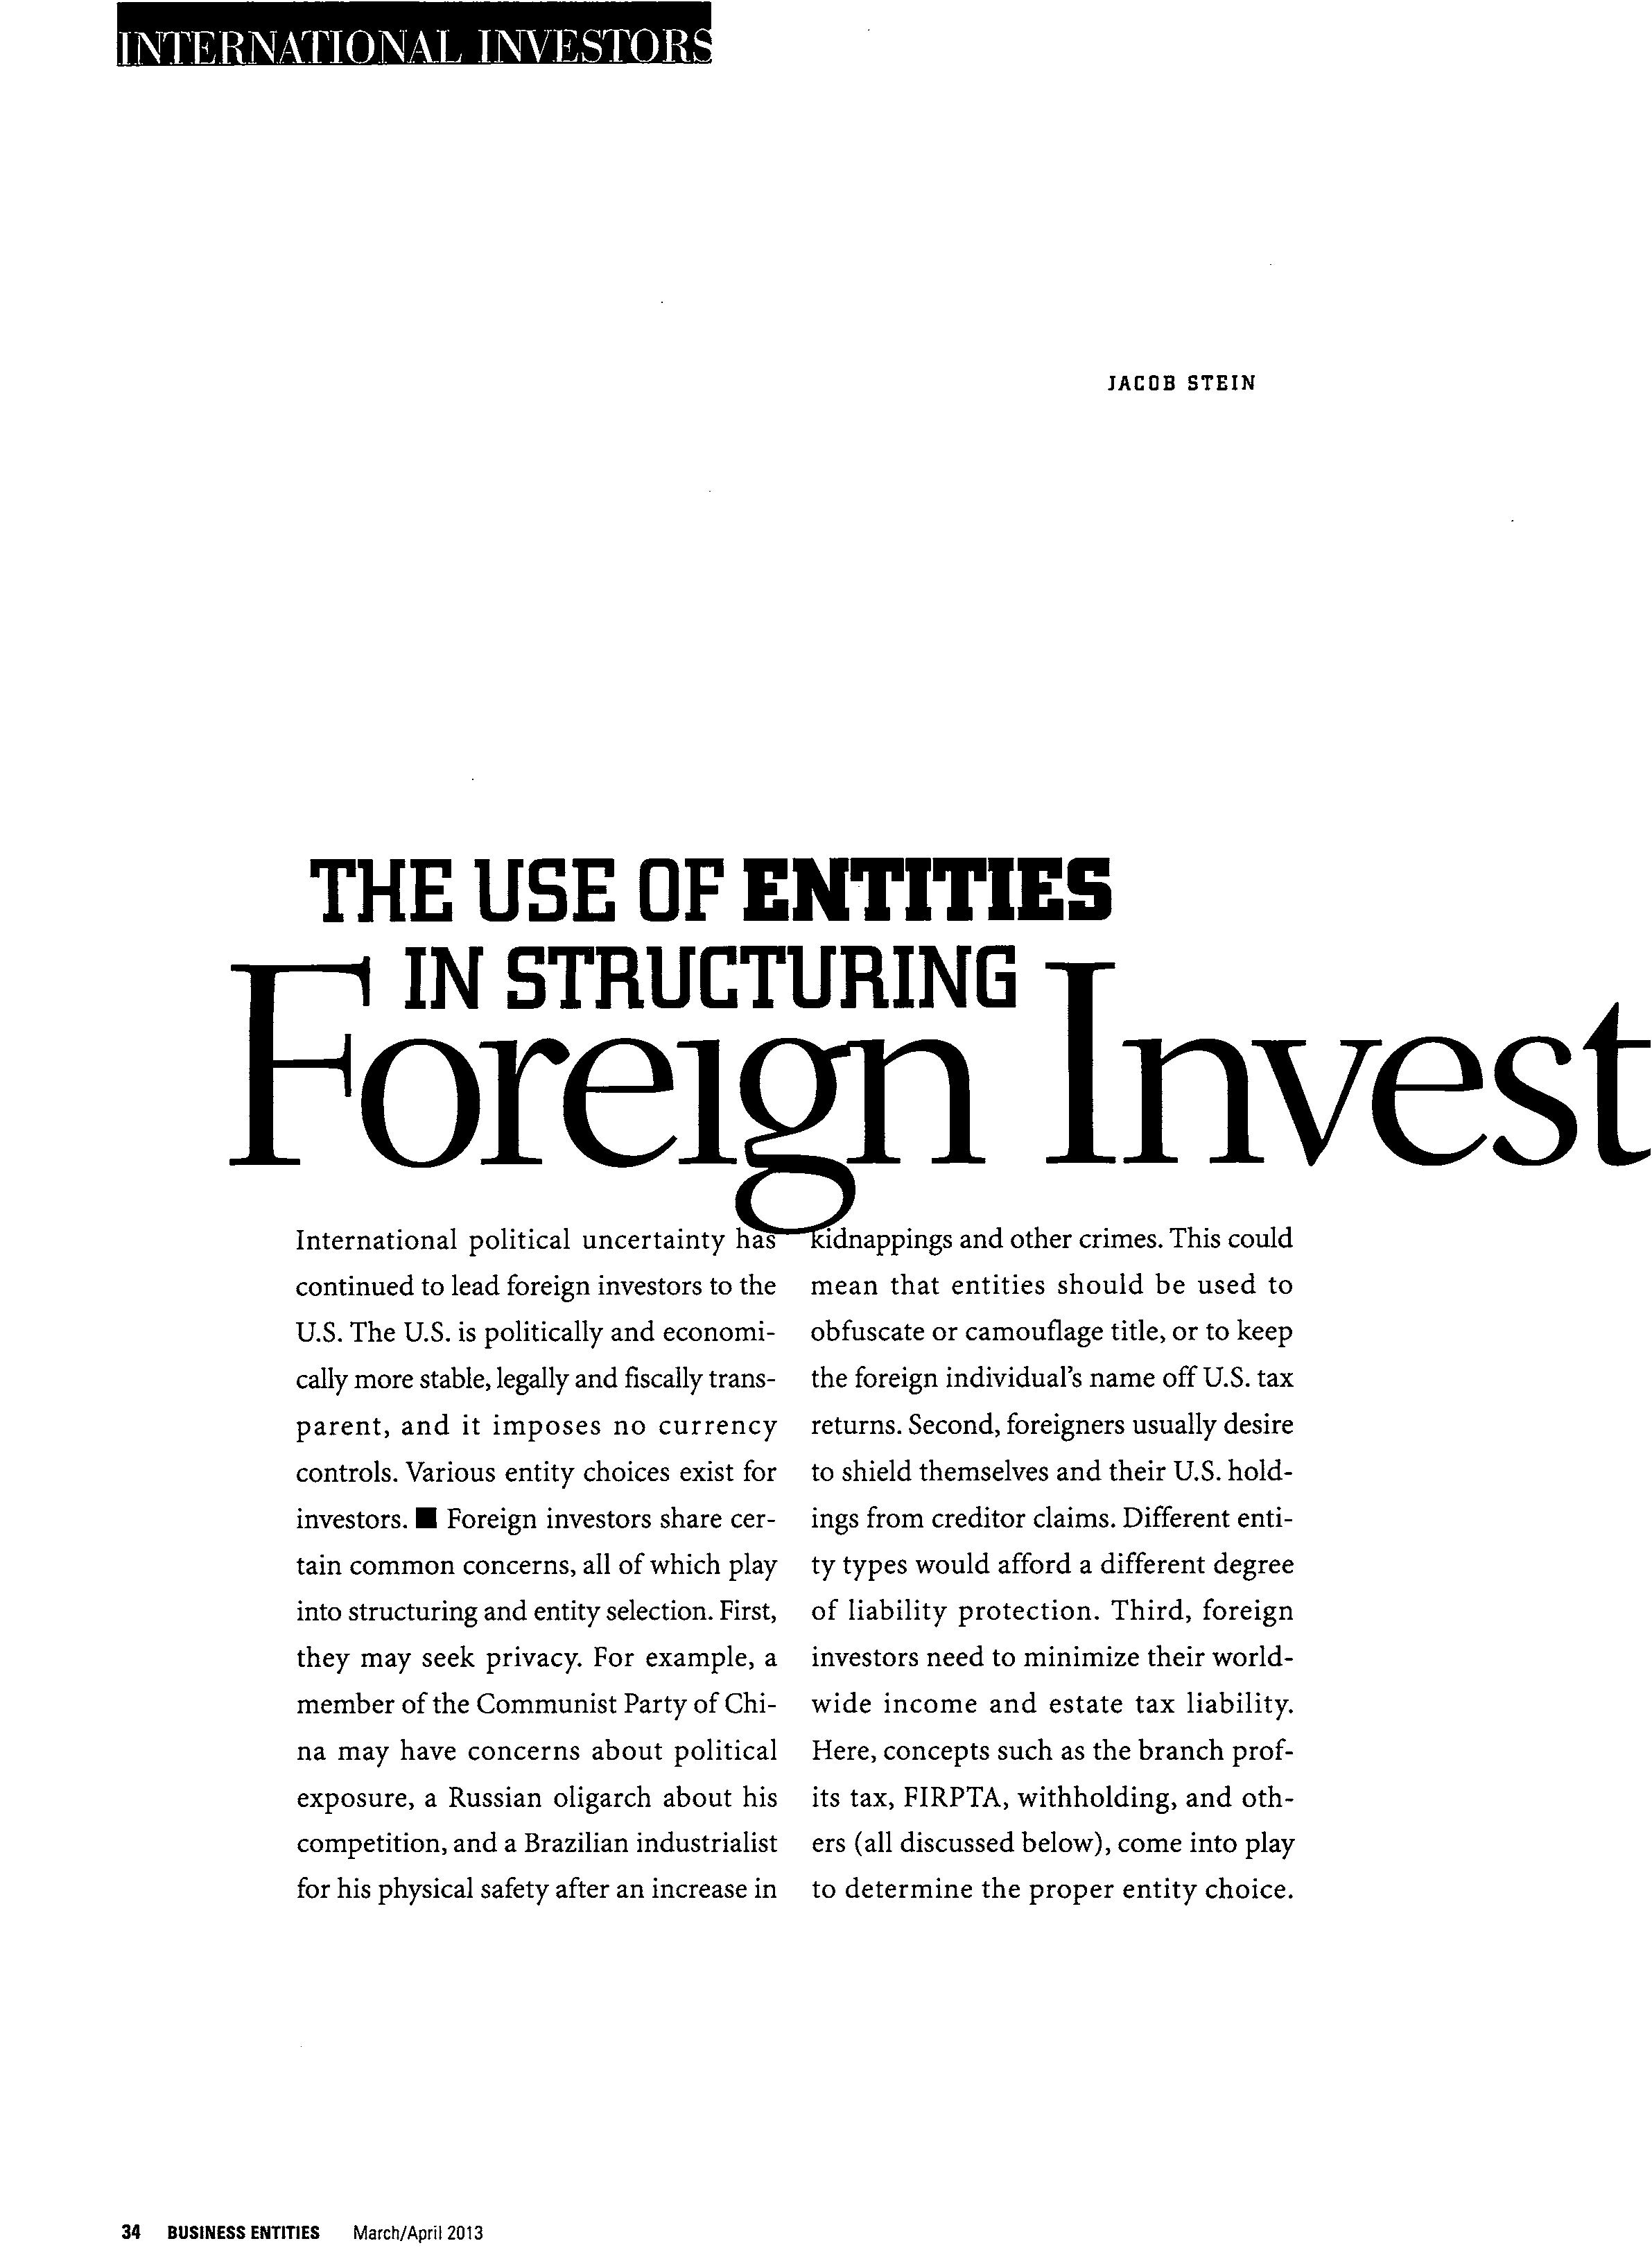 http://lataxlawyers.com/wp-content/uploads/2013/04/Article-The-Use-of-Entities-in-Structuring-Foreign-Investment-1.png